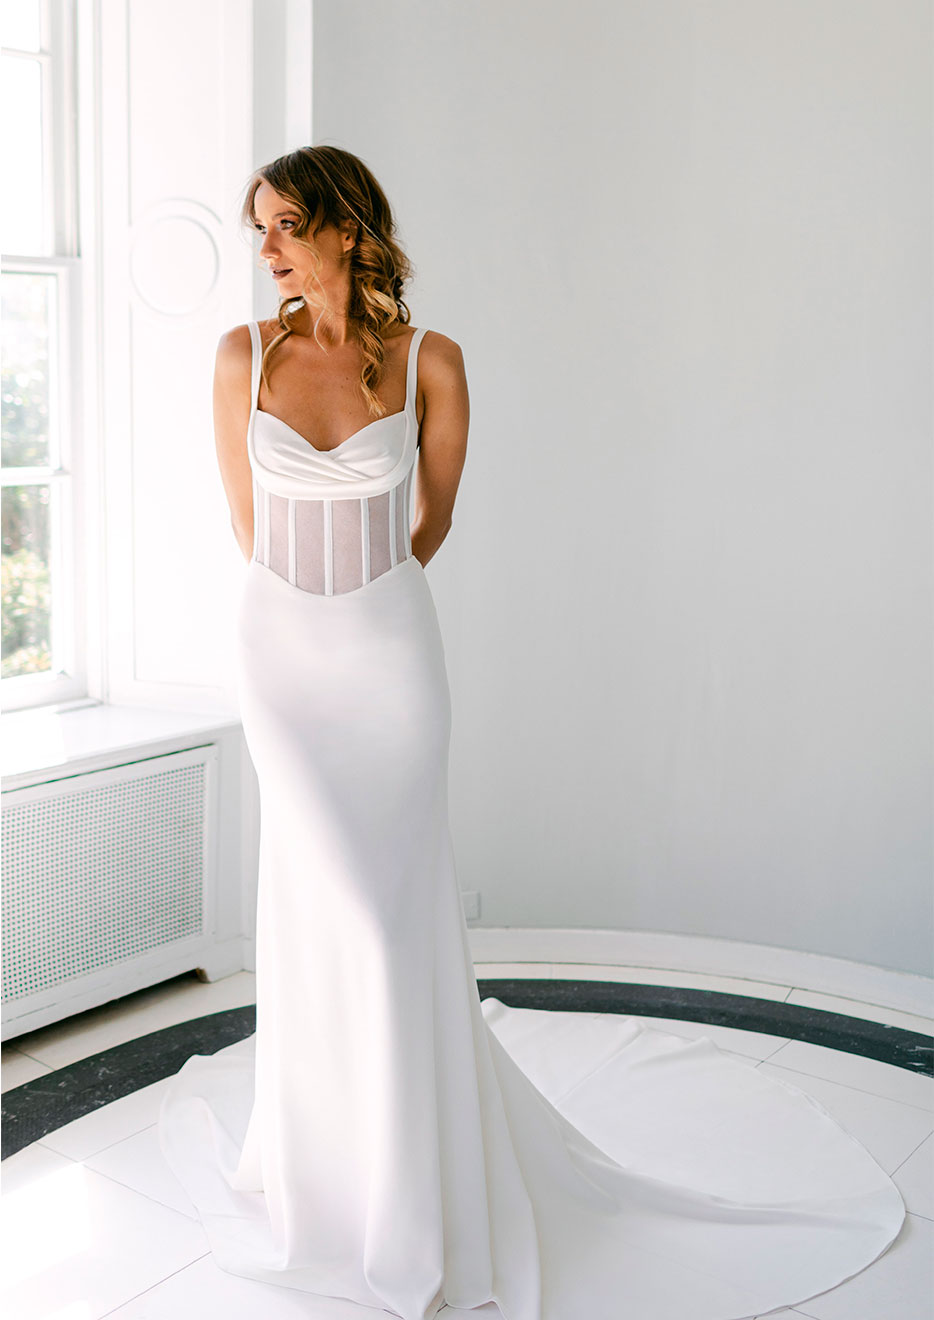 Wedding dress model Glory - Dress with thin straps sweetheart neck, trumpet gown with chapel train - Verdin New York